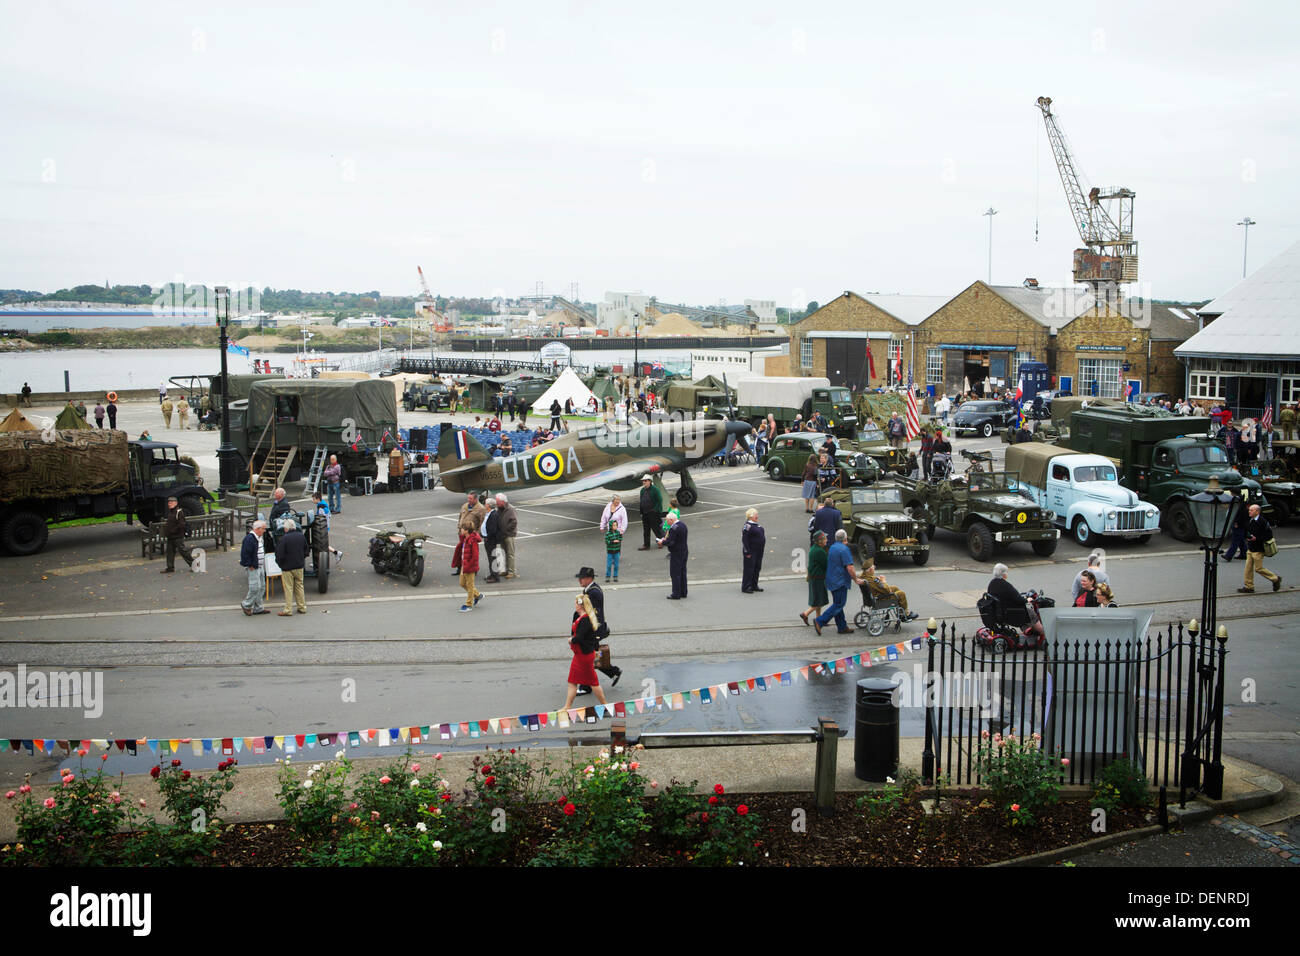 Chatham, UK. 21st Sep, 2013. Salute to the 40's - Britain's 1940's Home Front Event at The Historic Dockyard Chatham.  View of American military vehiicles, a Spitfire plane, warehouses, docks and people attending the event. Credit:  Tony Farrugia/Alamy Live News Stock Photo